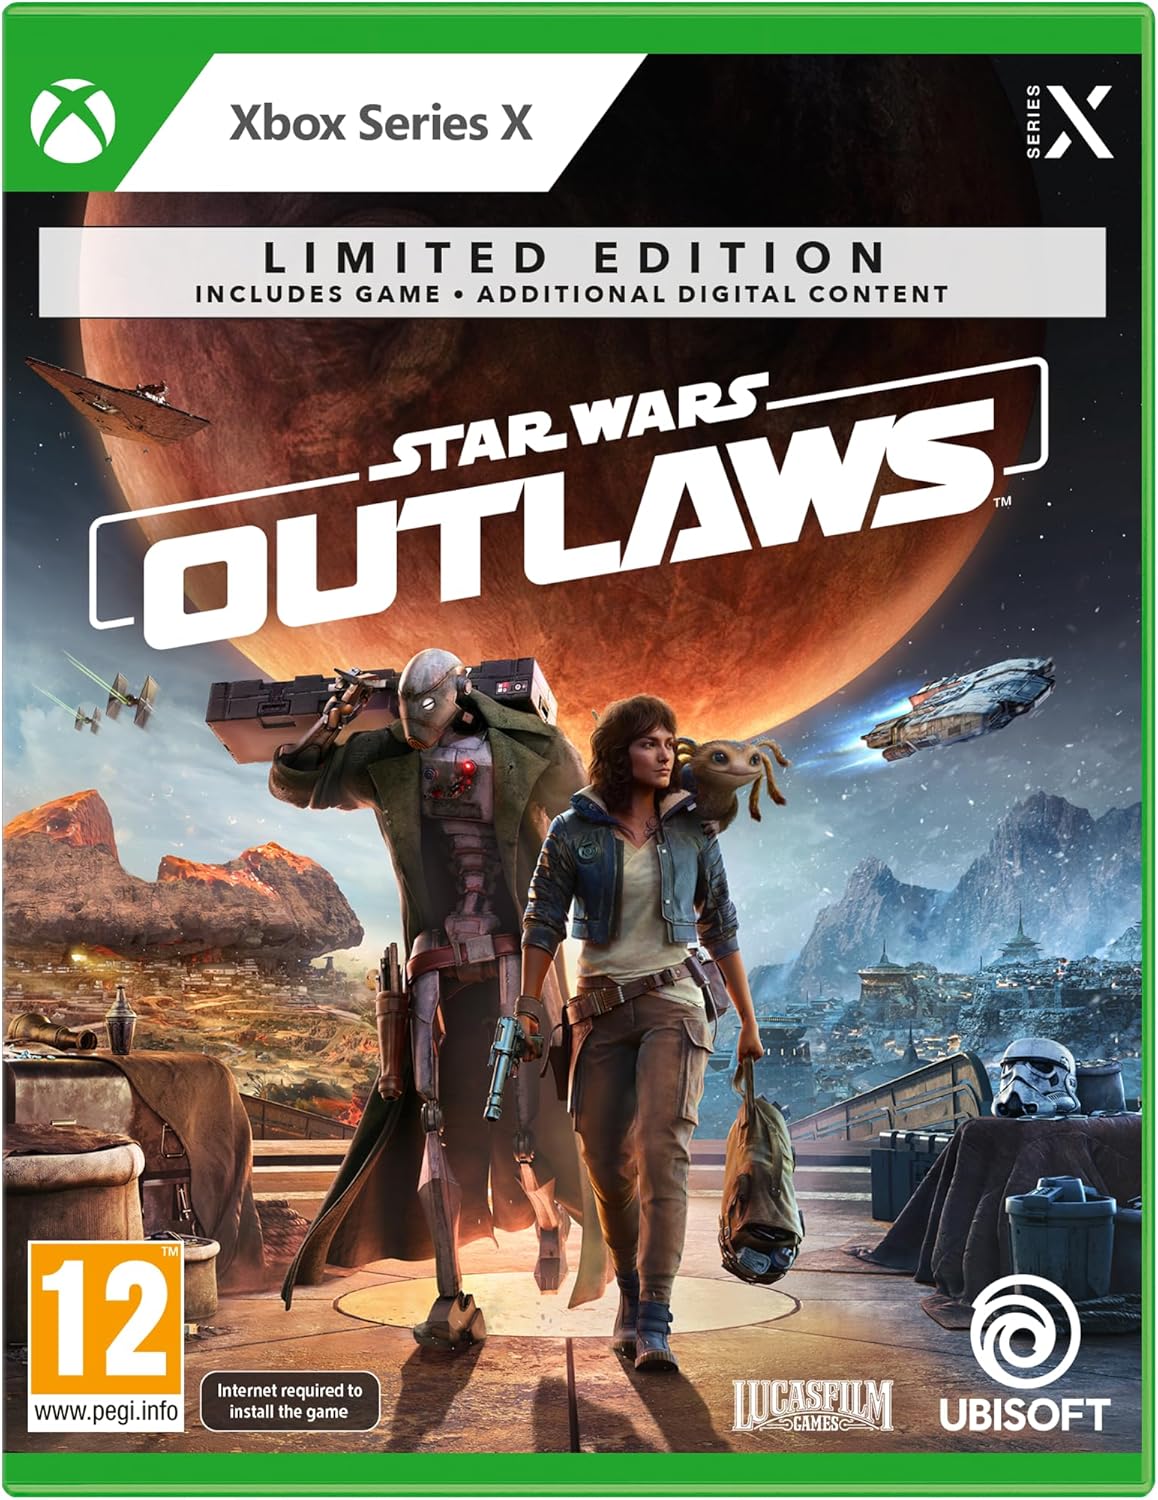 Star Wars Outlaws Digital Download Key (Xbox Series X|S): Europe